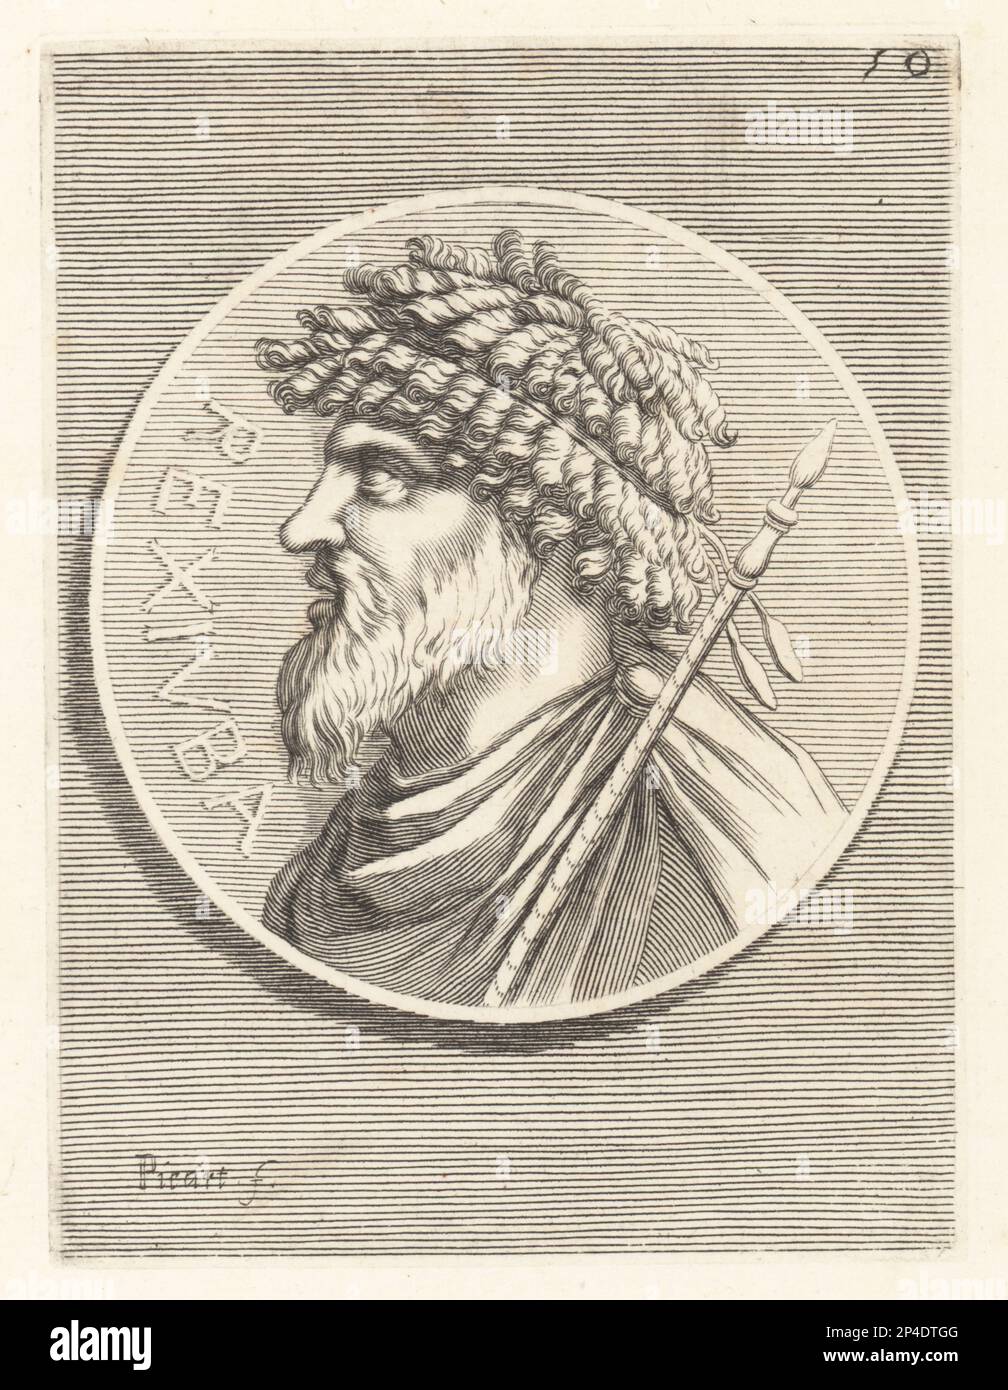 King Juba I of Numidia, c. 85-46 BC, king of Numidia (reigned 60-46 BC). He was the son and successor to Hiempsal II. With beard and curly hair, mantle and sceptre. From a silver coin. Rex Iuba. Copperplate engraving by Etienne Picart after Giovanni Angelo Canini from Iconografia, cioe disegni d'imagini de famosissimi monarchi, regi, filososi, poeti ed oratori dell' Antichita, Drawings of images of famous monarchs, kings, philosophers, poets and orators of Antiquity, Ignatio de’Lazari, Rome, 1699. Stock Photo